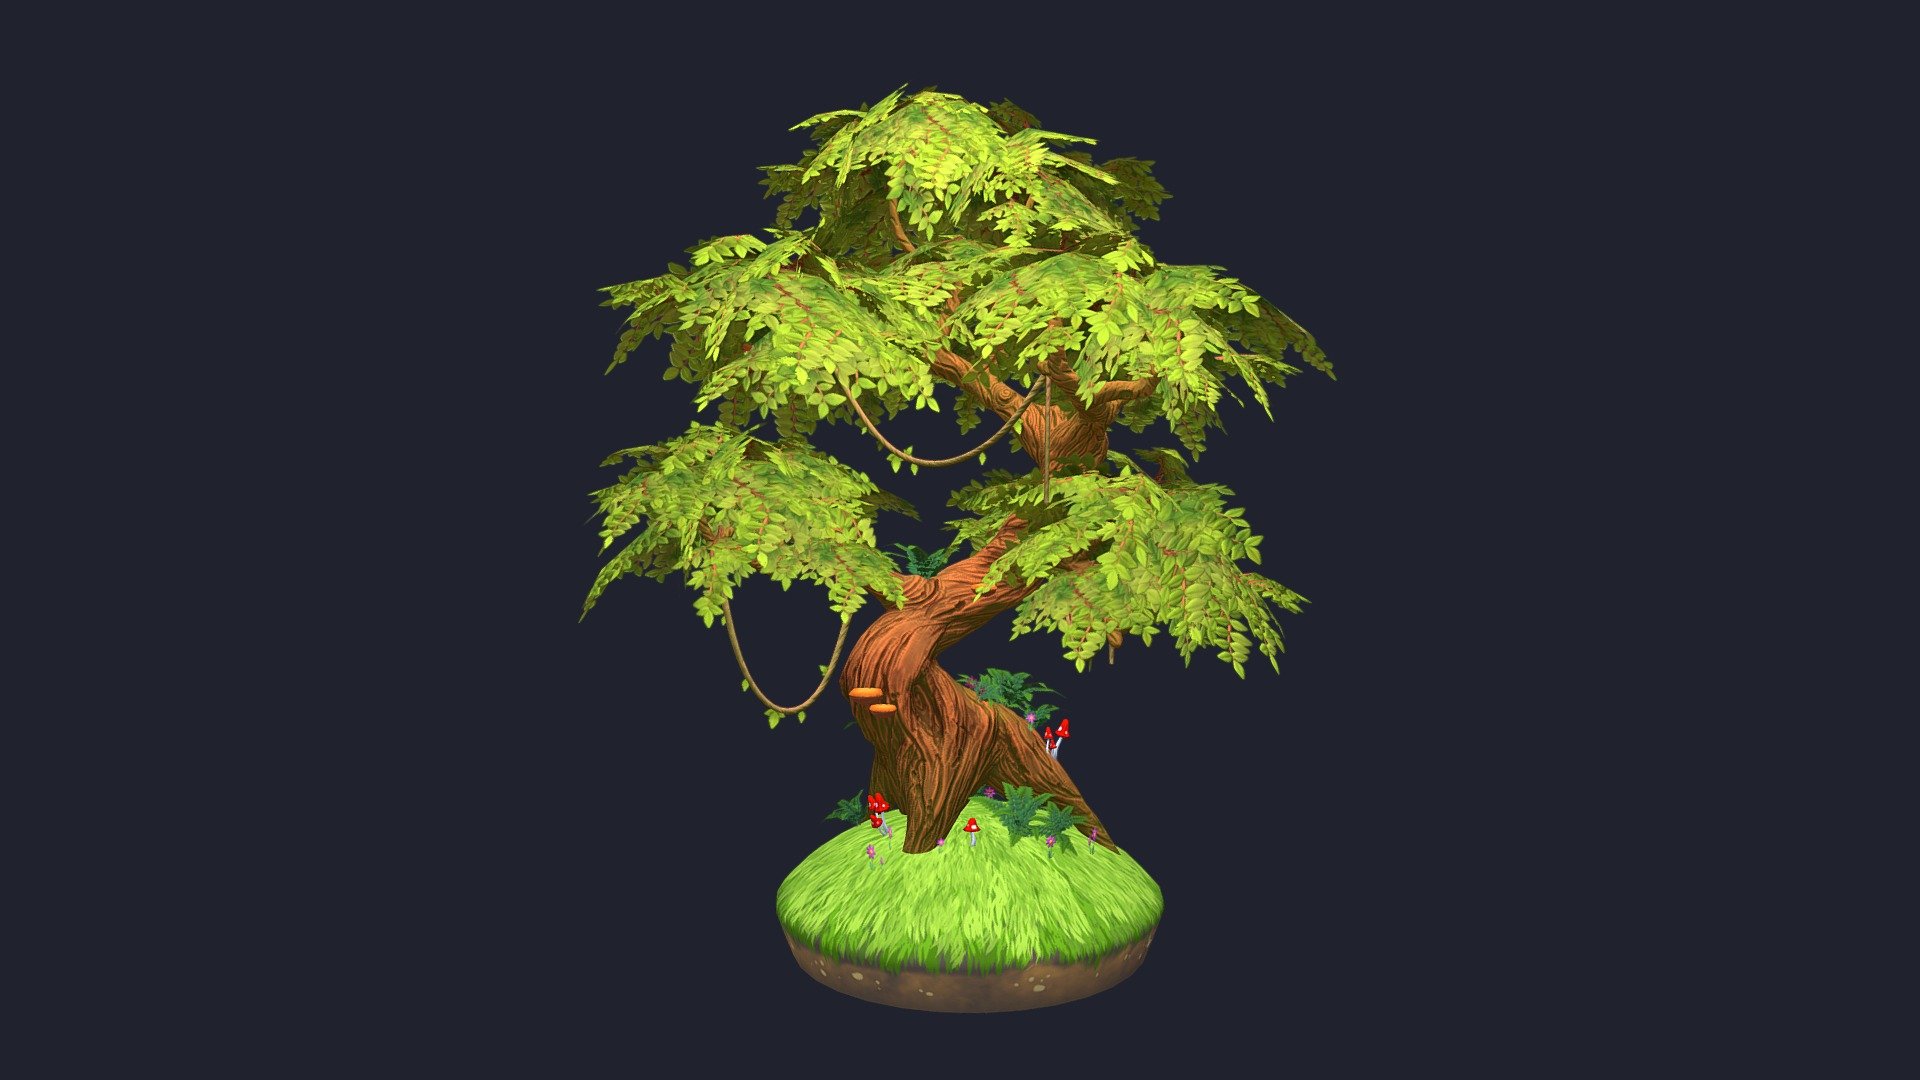 Magic tree in a fantasy style
Consists of 4 materials and 4K PBR textures - Stylized Tree - 3D model by Roman Khairov (@romankhairov) 3d model